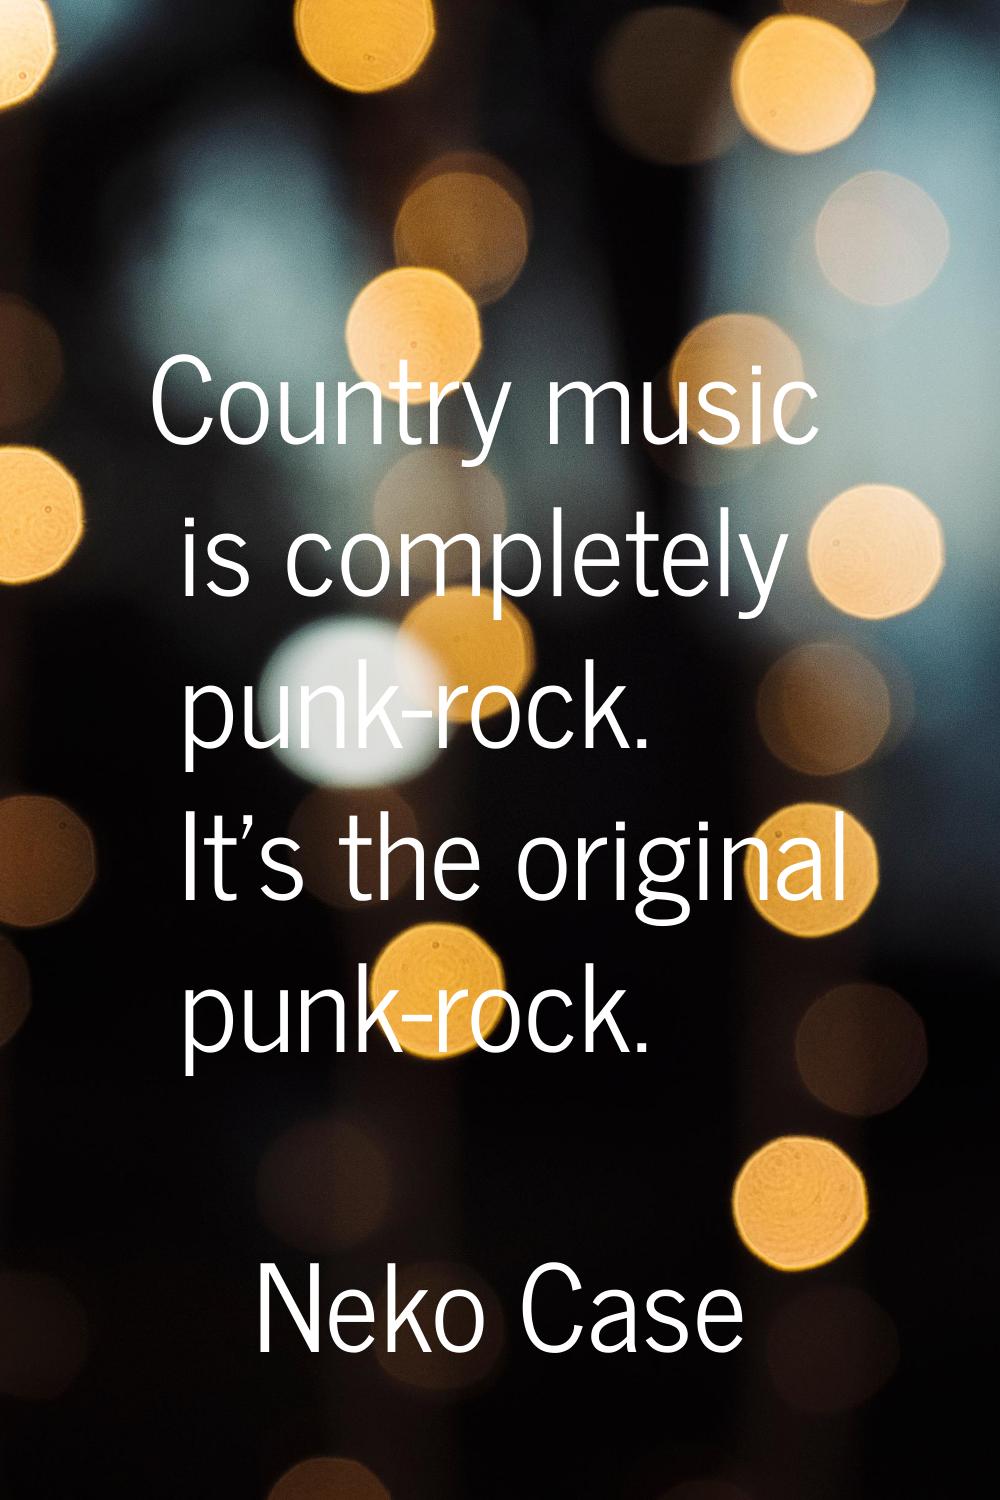 Country music is completely punk-rock. It's the original punk-rock.